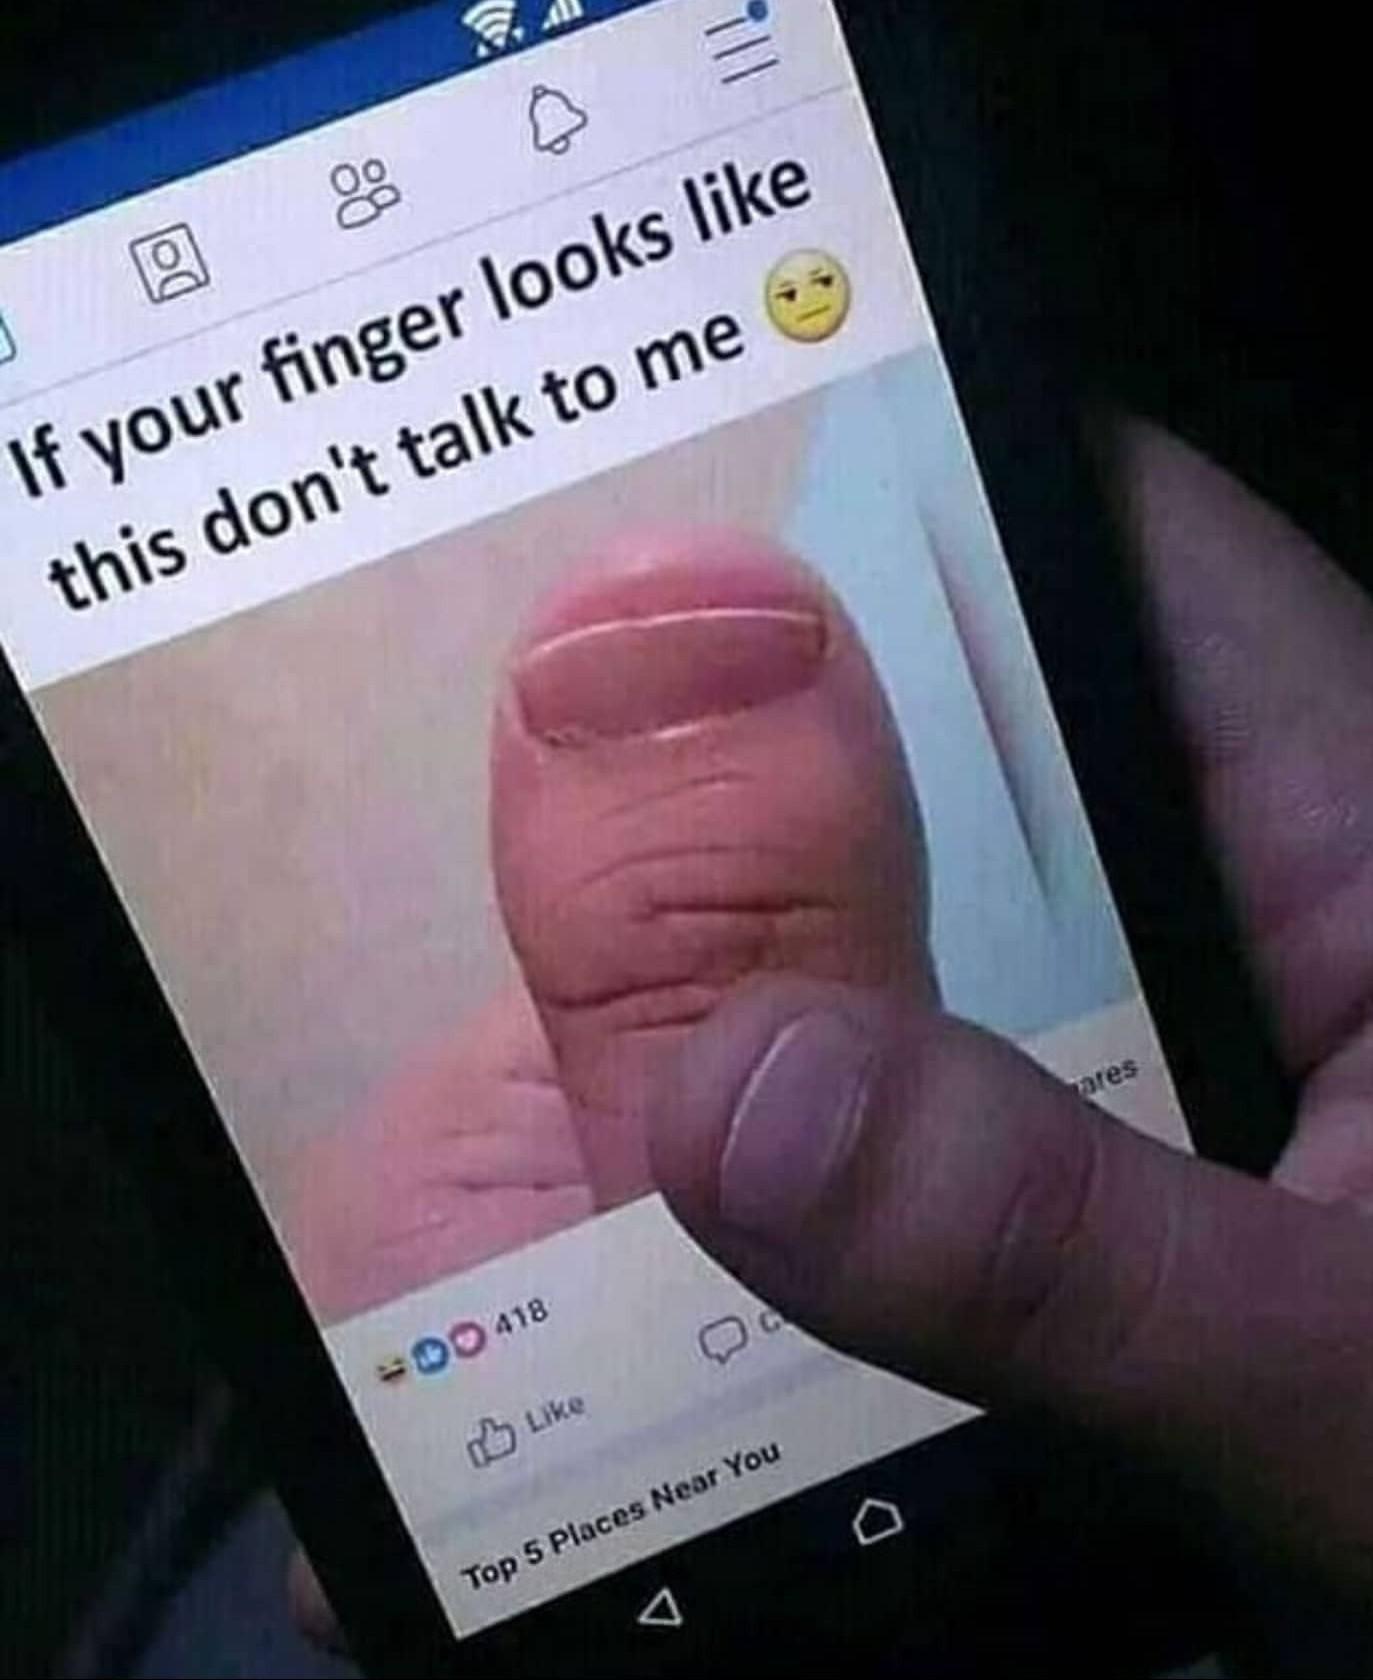 Depression, UTF depression memes Depression, UTF text: 00 If your finger looks like this don't talk to me mes Like O Top 5 Places Near You 